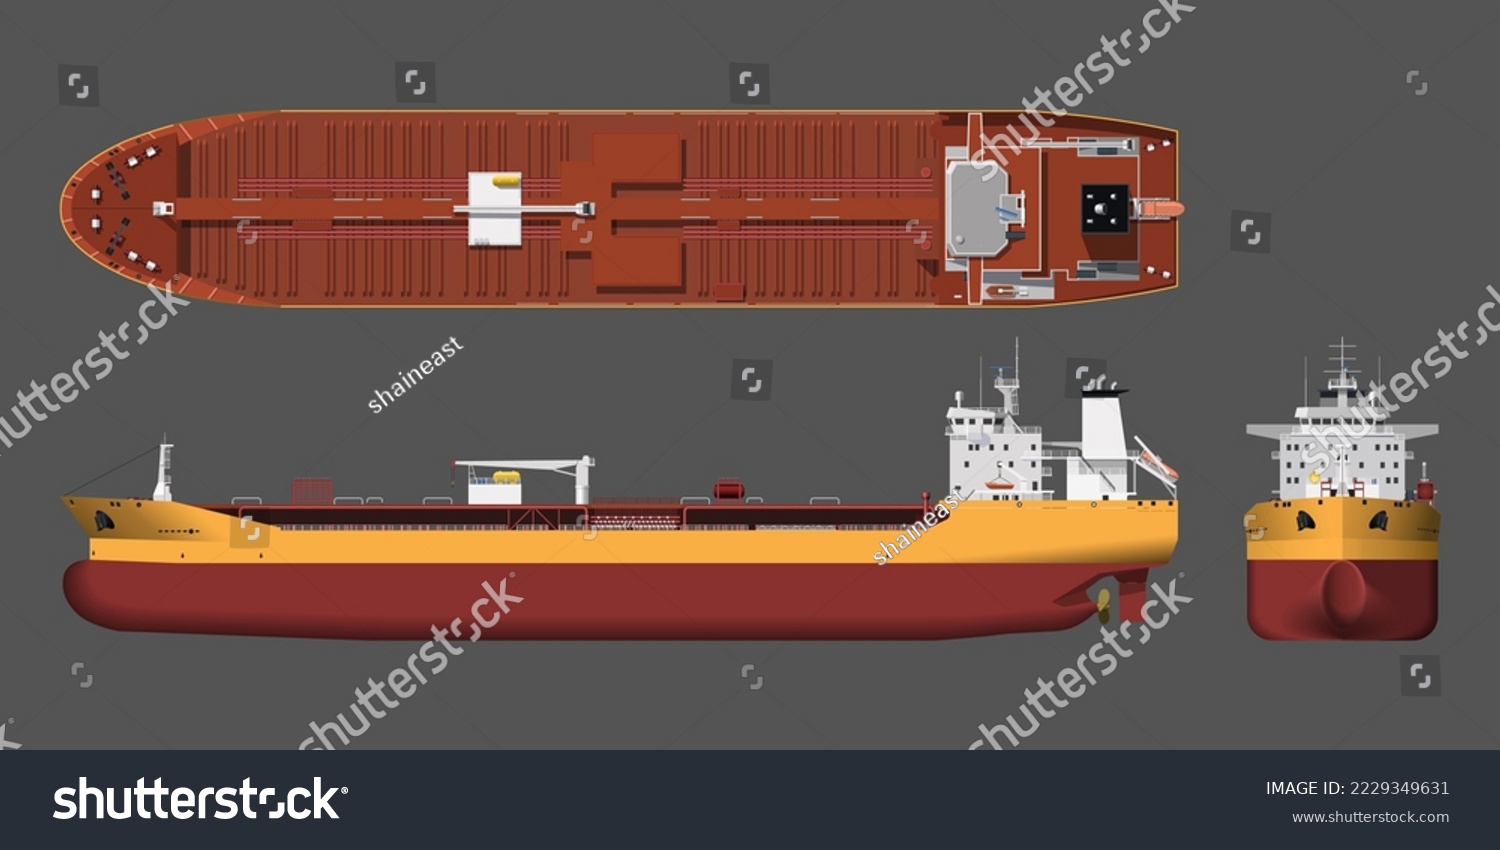 SVG of Tanker drawing. 3d cargo ship industrial blueprint. Petroleum boat view top, side and front. Isolated vehicle. Commerce water transport. Vector illustration svg